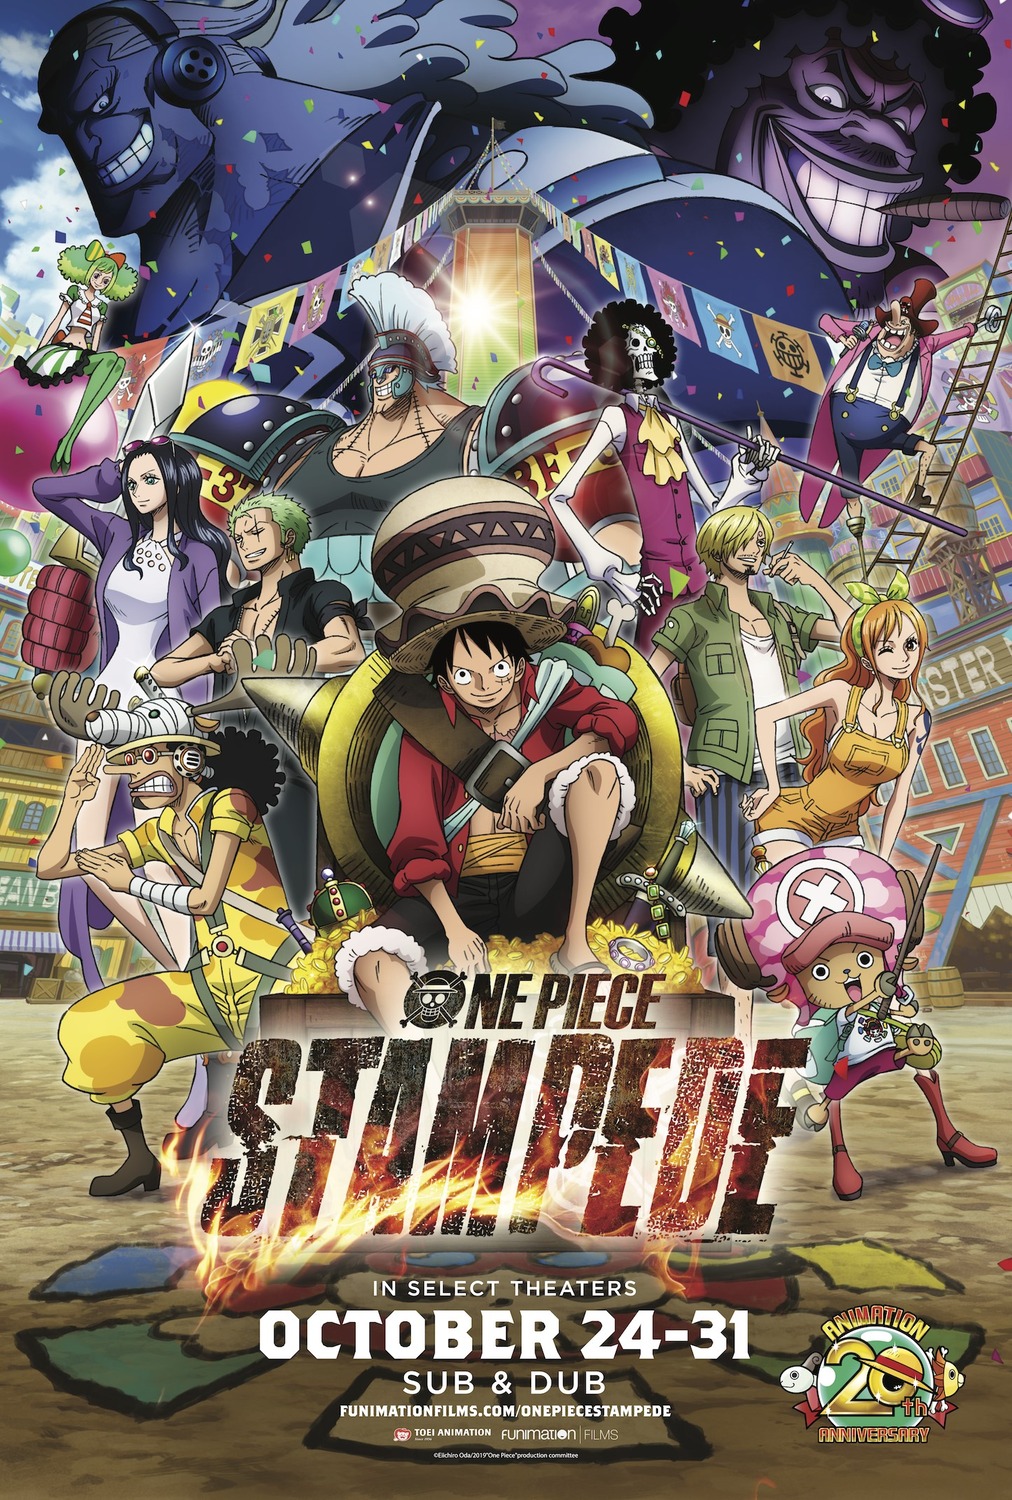 Extra Large Movie Poster Image for One Piece: Stampede 